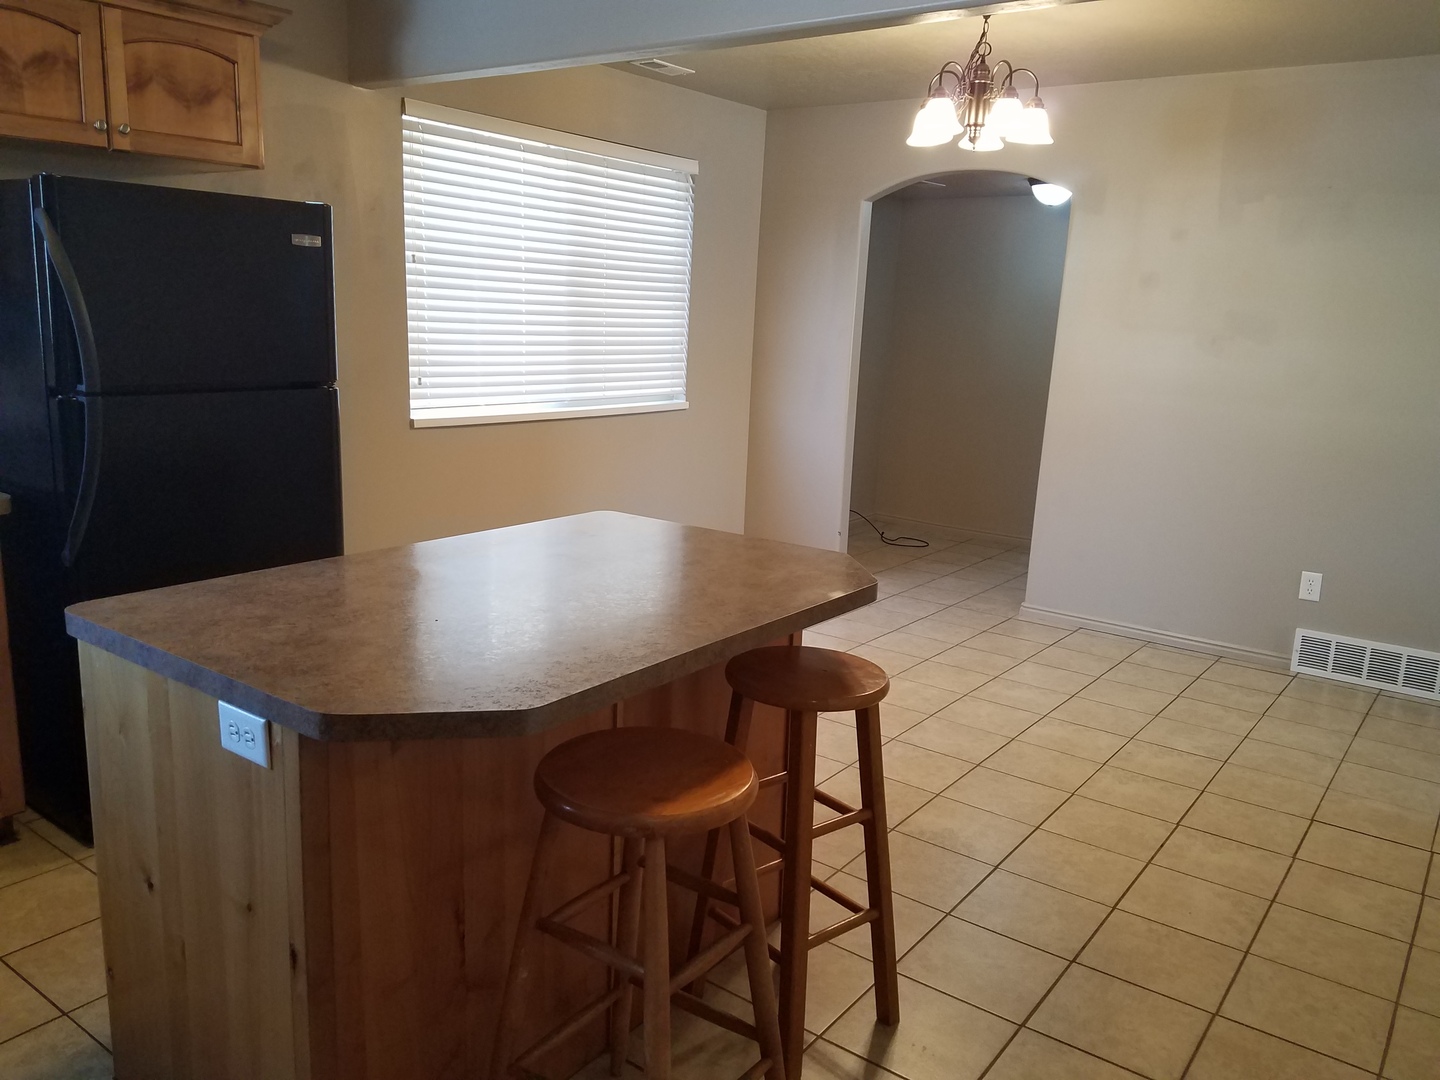 3 Bed 2.5 Bath Townhome for Rent in Layton!